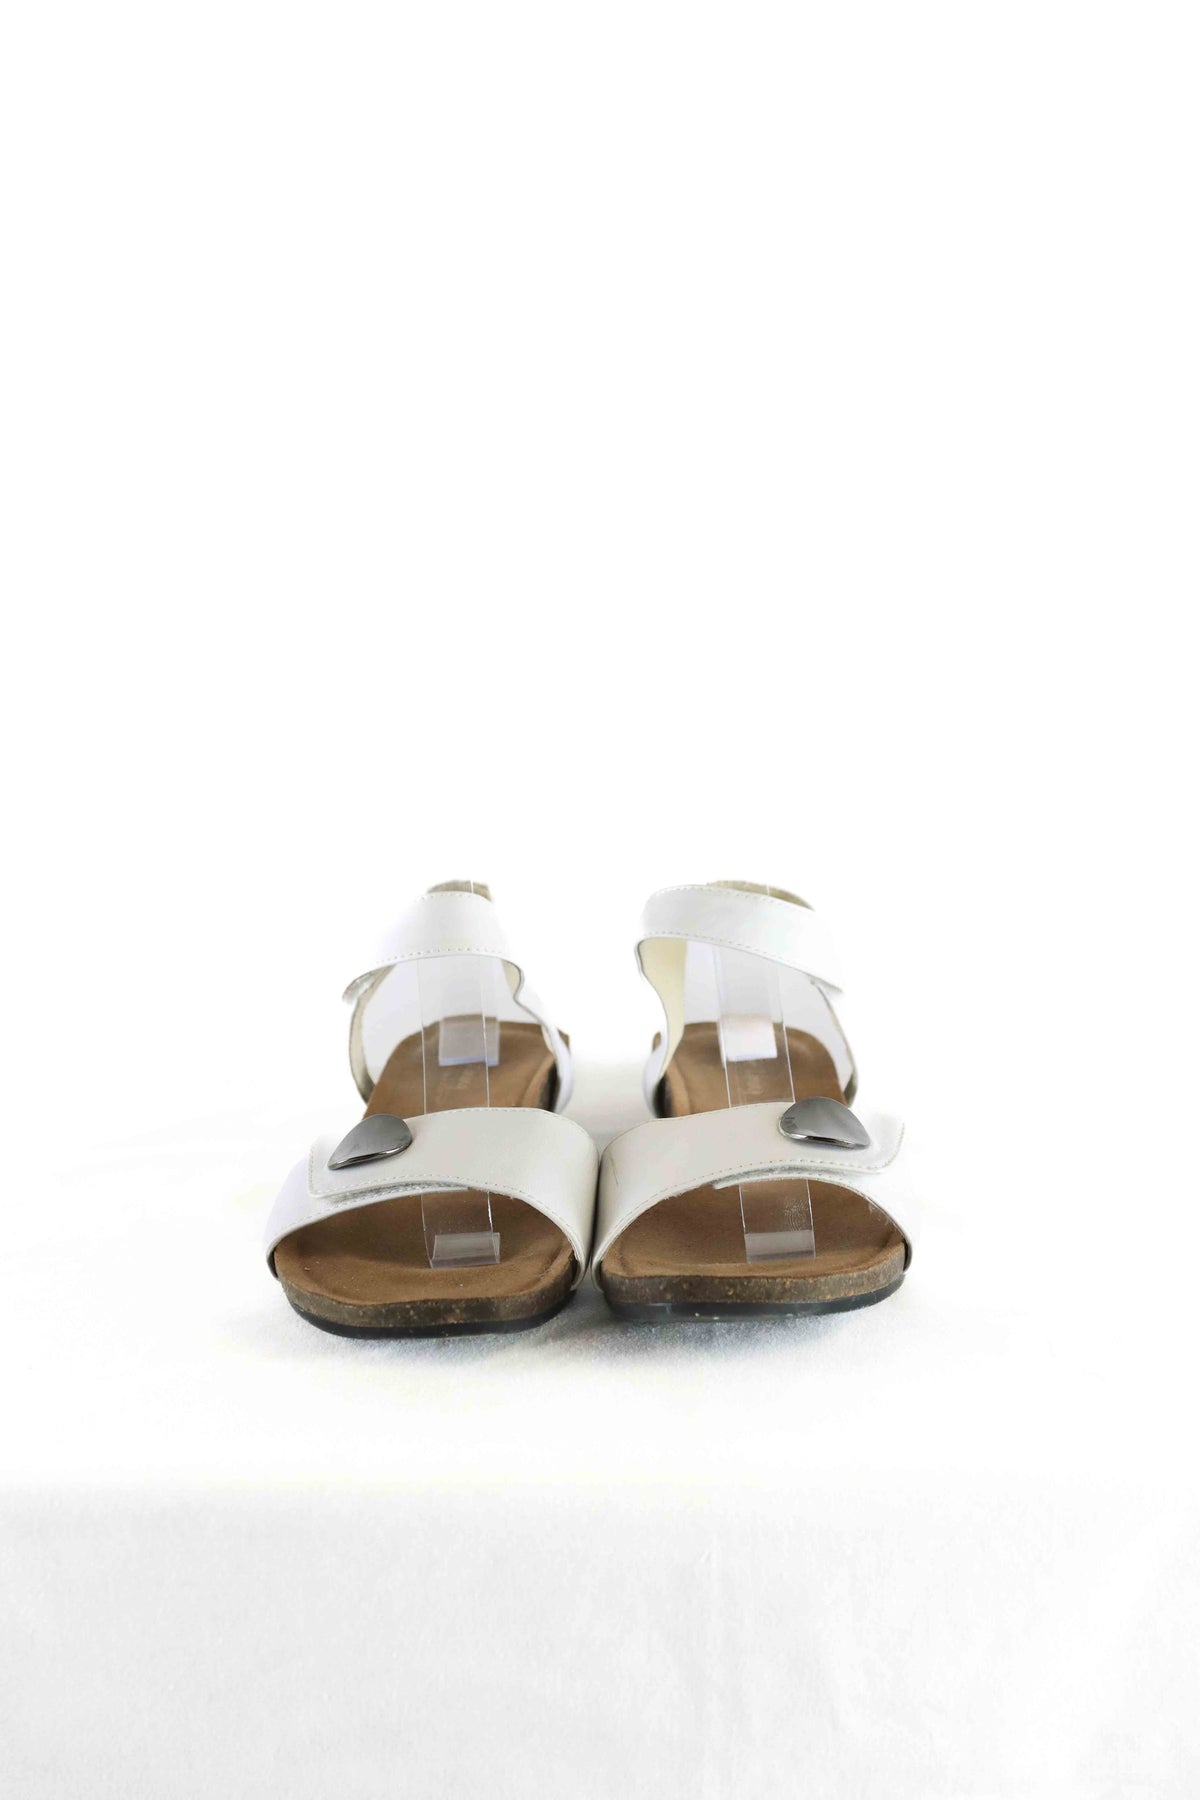 Silver Lining White Sandals 39